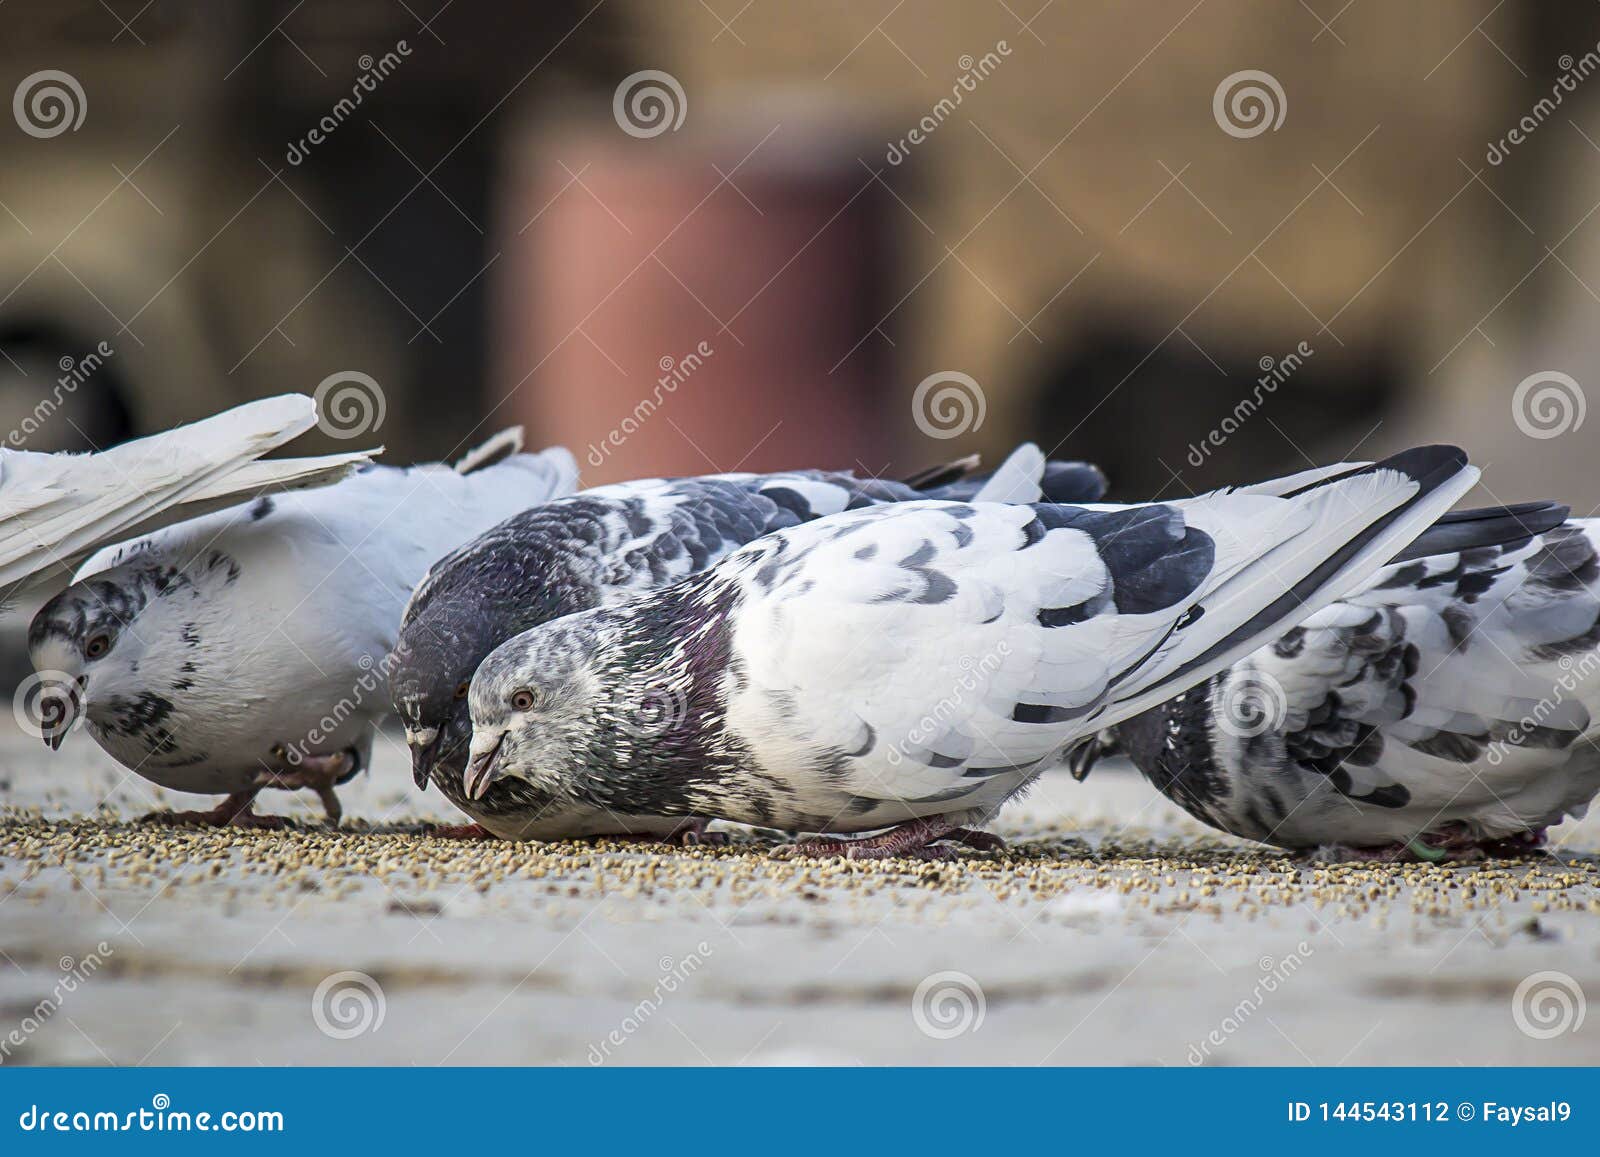 a young pigeon with grey nech and while feather